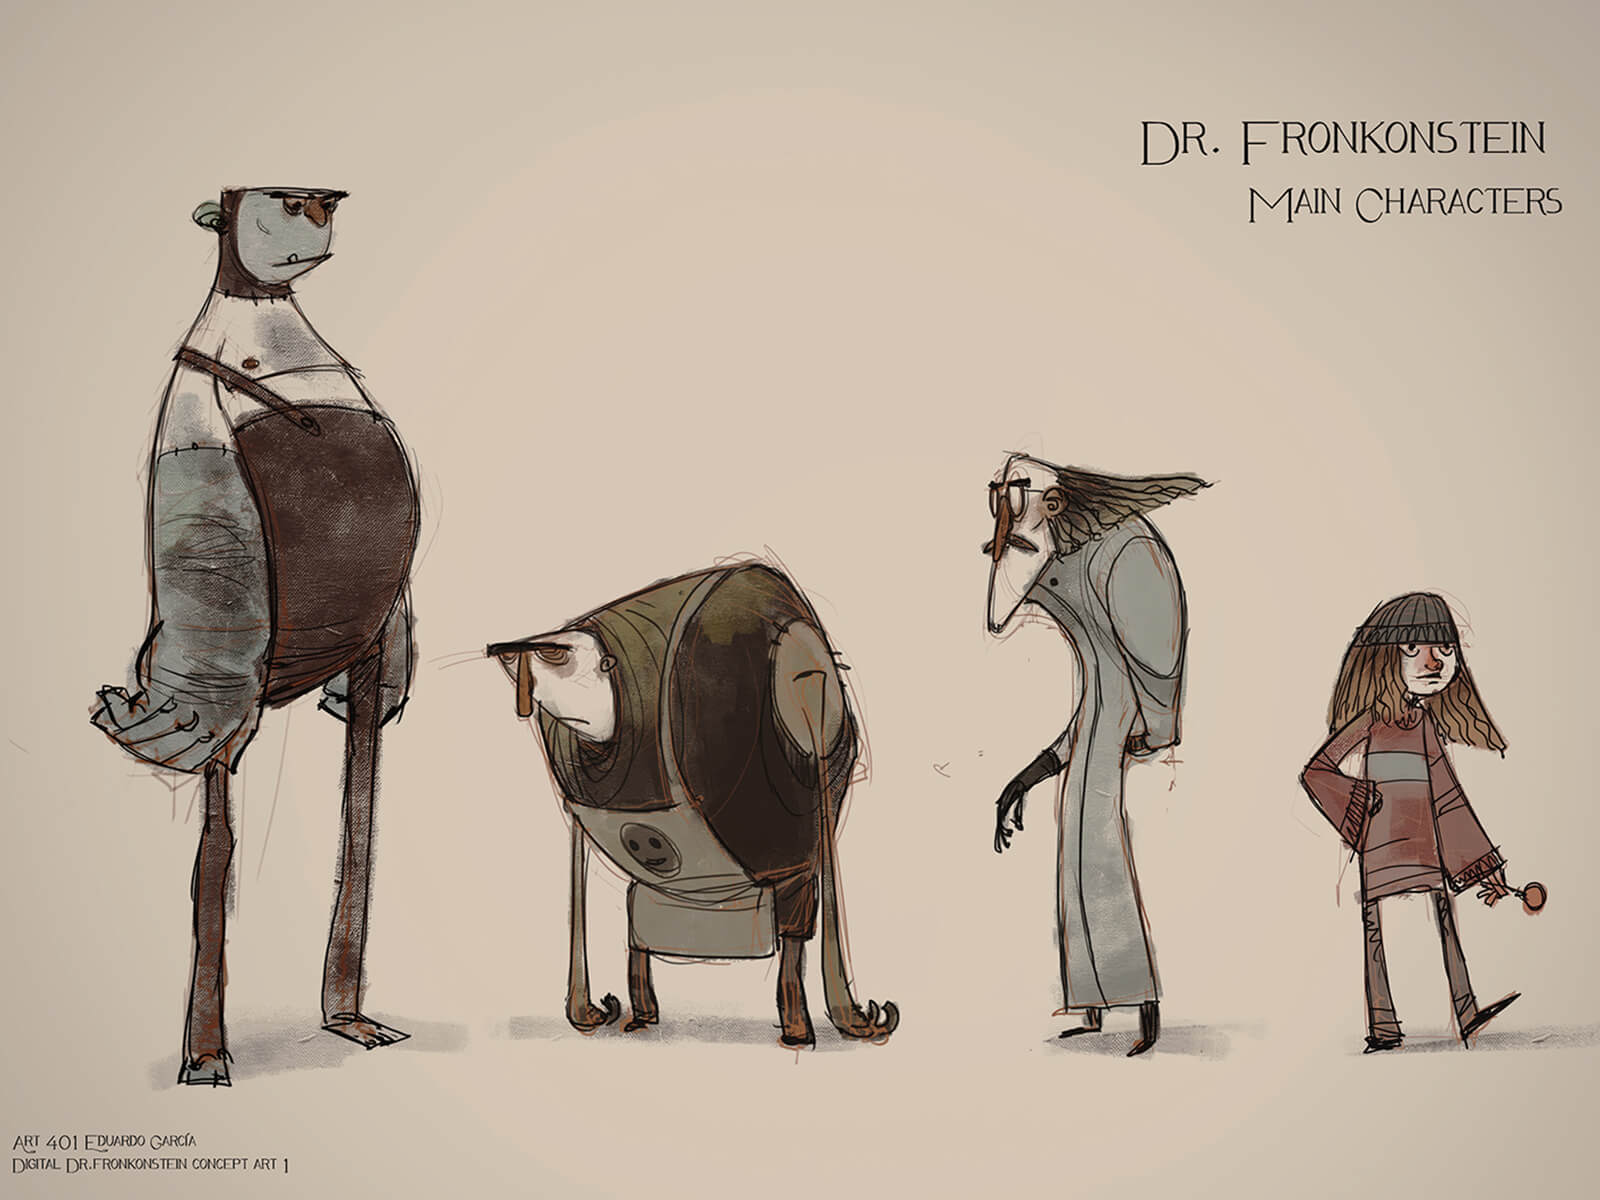 Concept sketches of characters, including a tall monster, hunched-over assistant, mad scientist, and a young, modern girl.